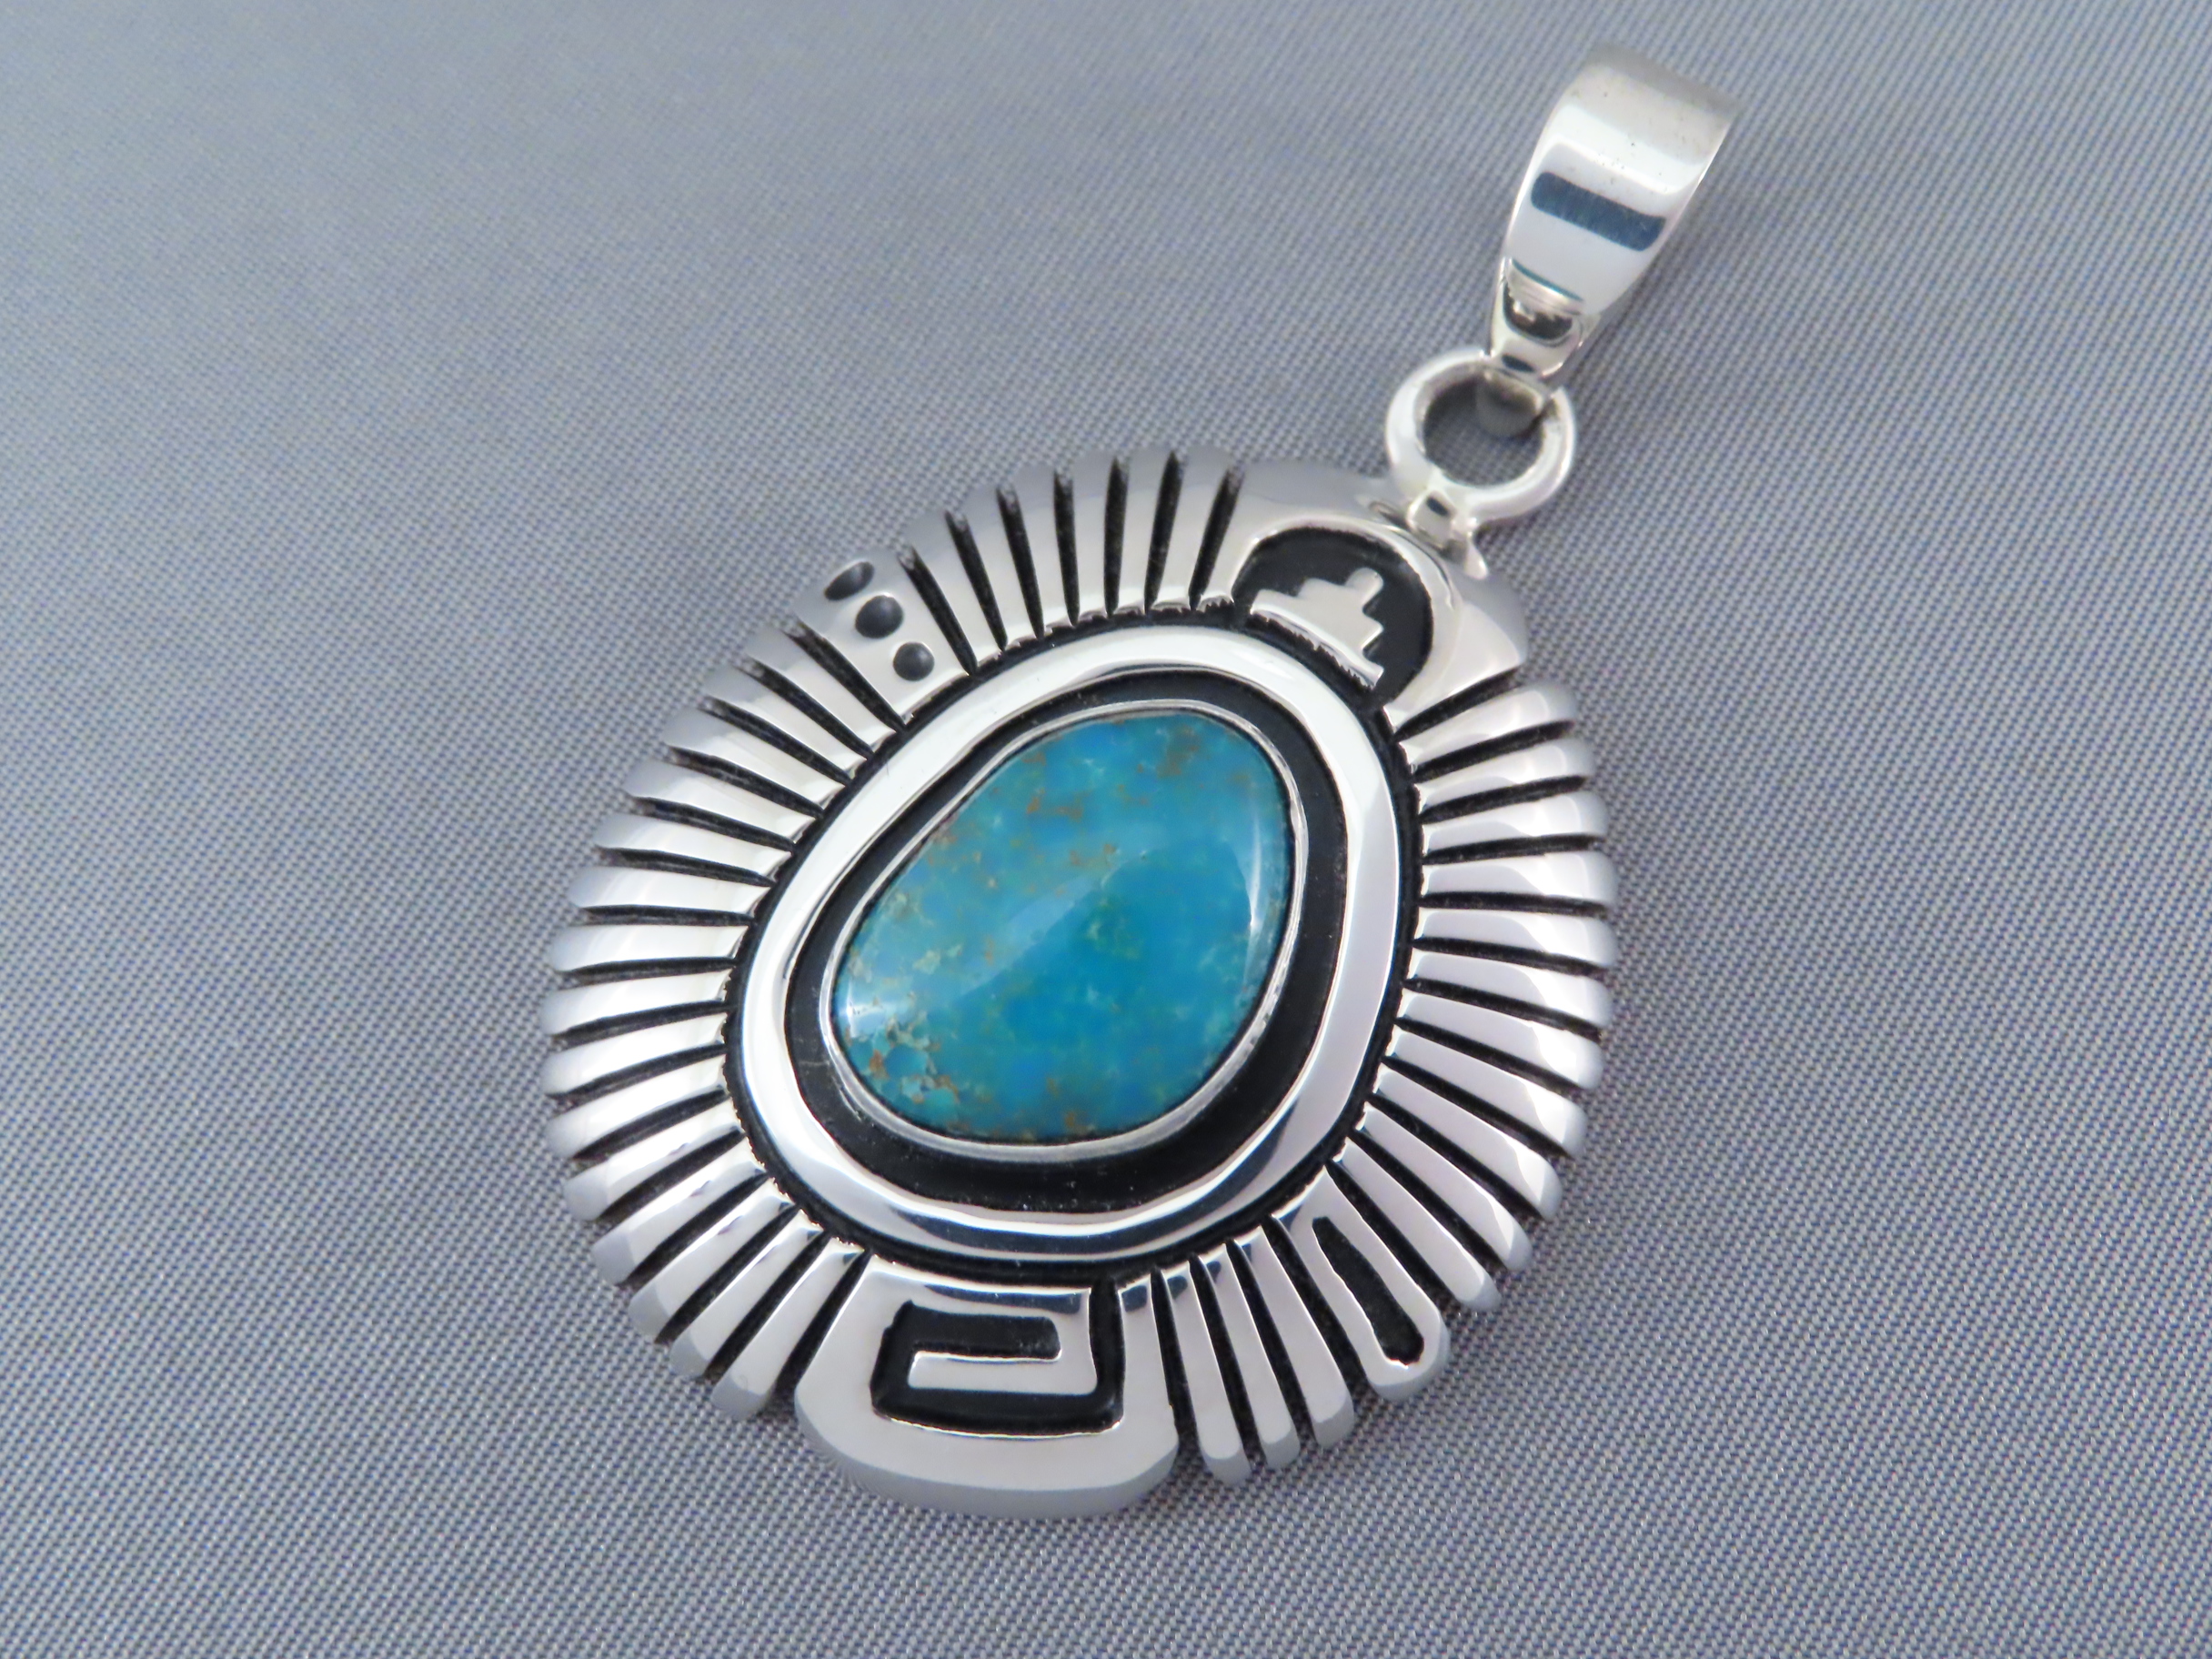 Bisbee Turquoise Pendant by Steven J. Begay - Native American Jewelry